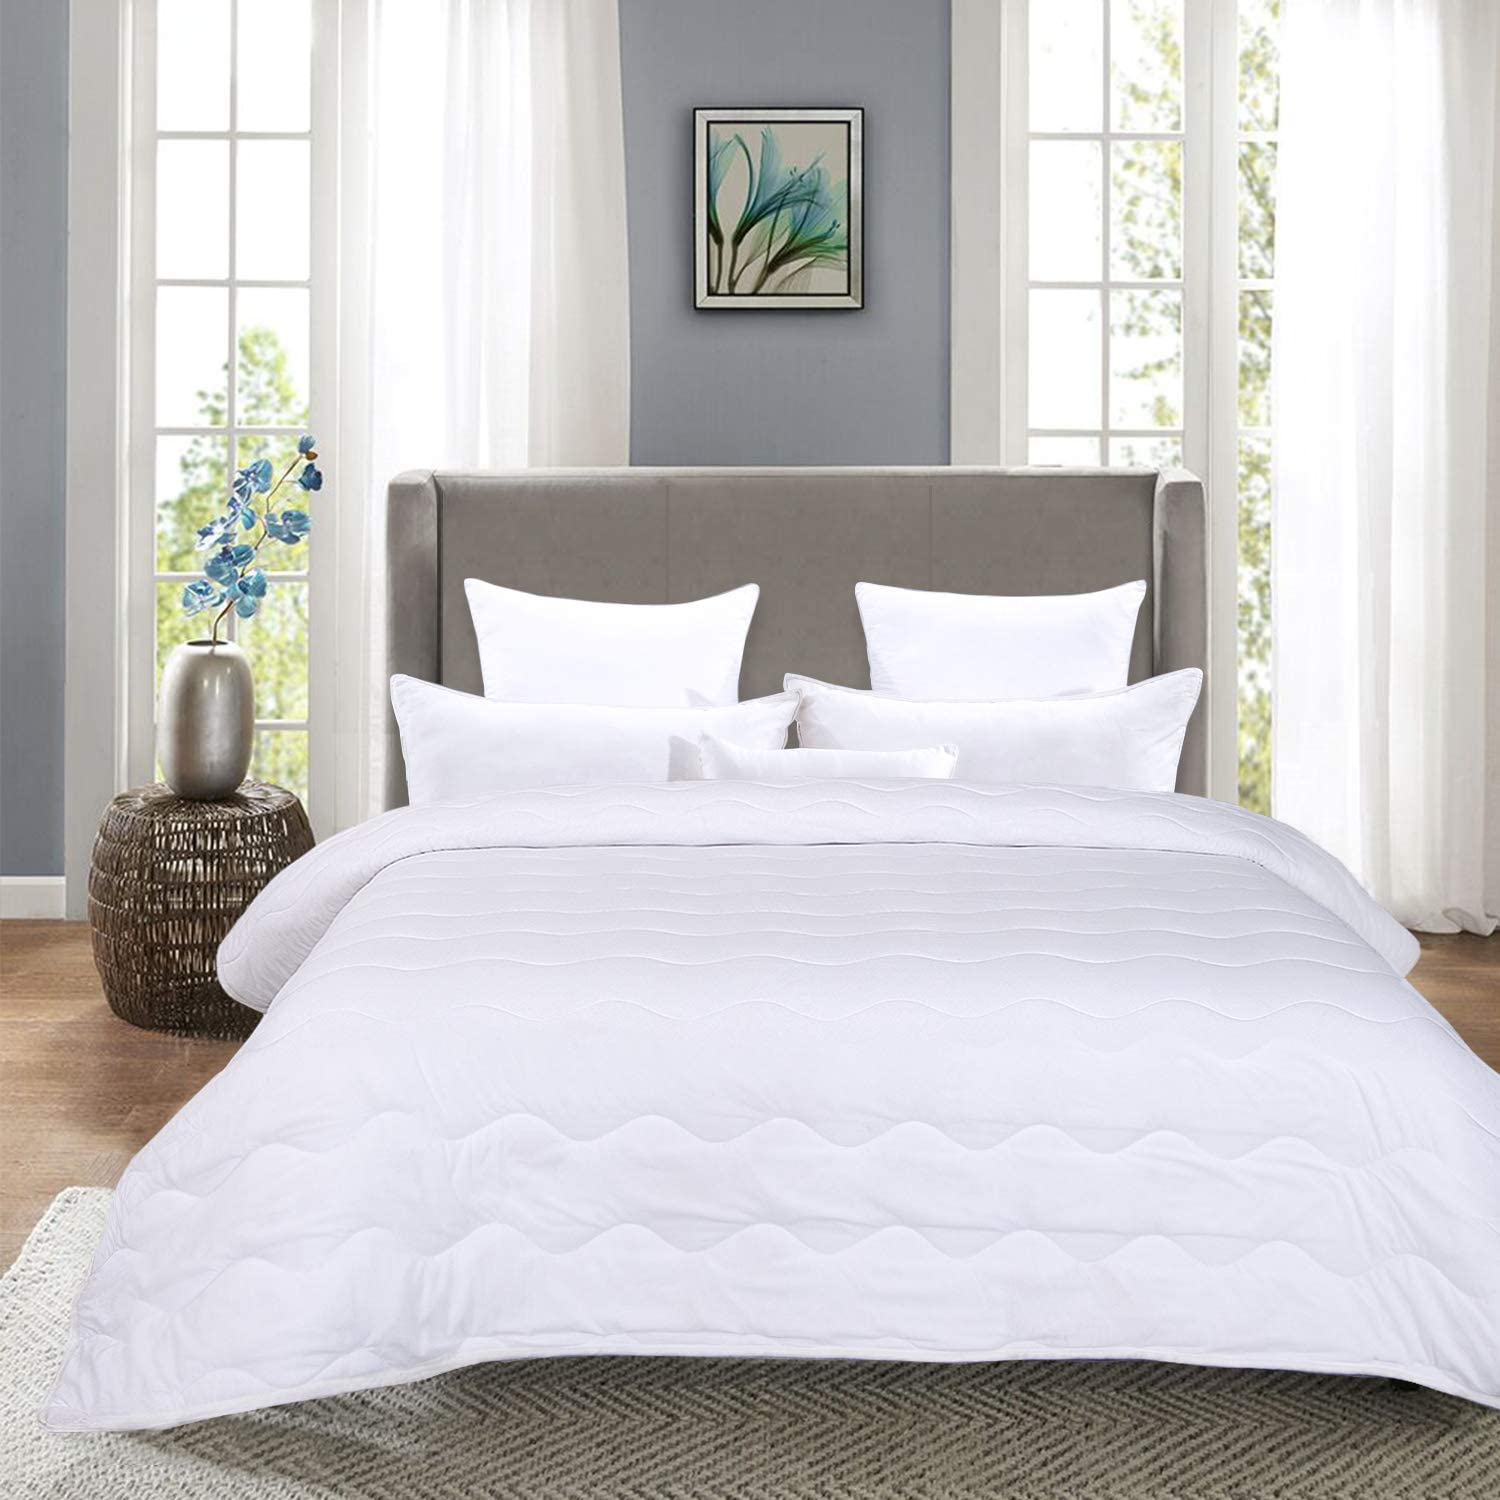 Price:$21.49  Lightweight Twin Down Alternative Quilted Comforter Twin Size - All Season Plush Microfiber - Machine Washable Duvet Insert- Warmth Bed Comforter ( Twin, White) : Home & Kitchen